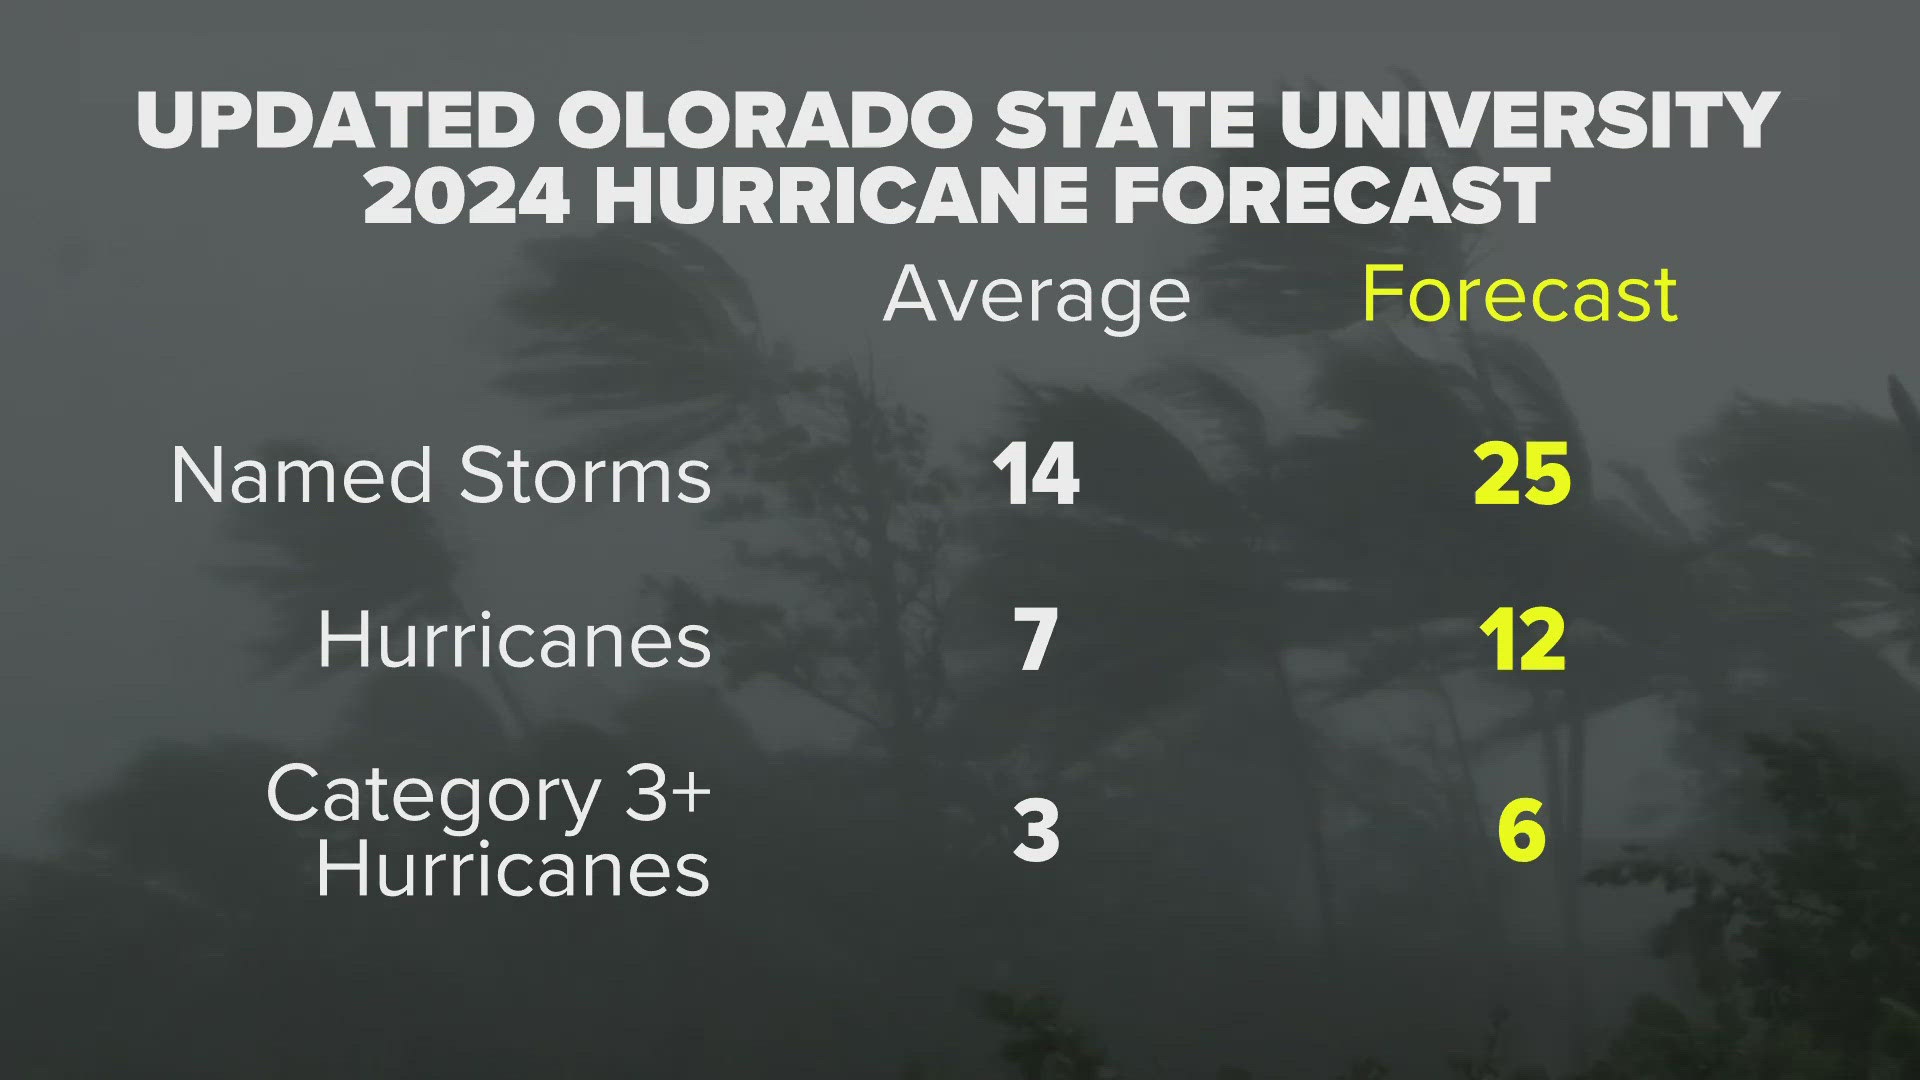 They're now calling for more named storms and major hurricanes. But they want to remind people -- it only takes one that affects you to make it an "active" season.